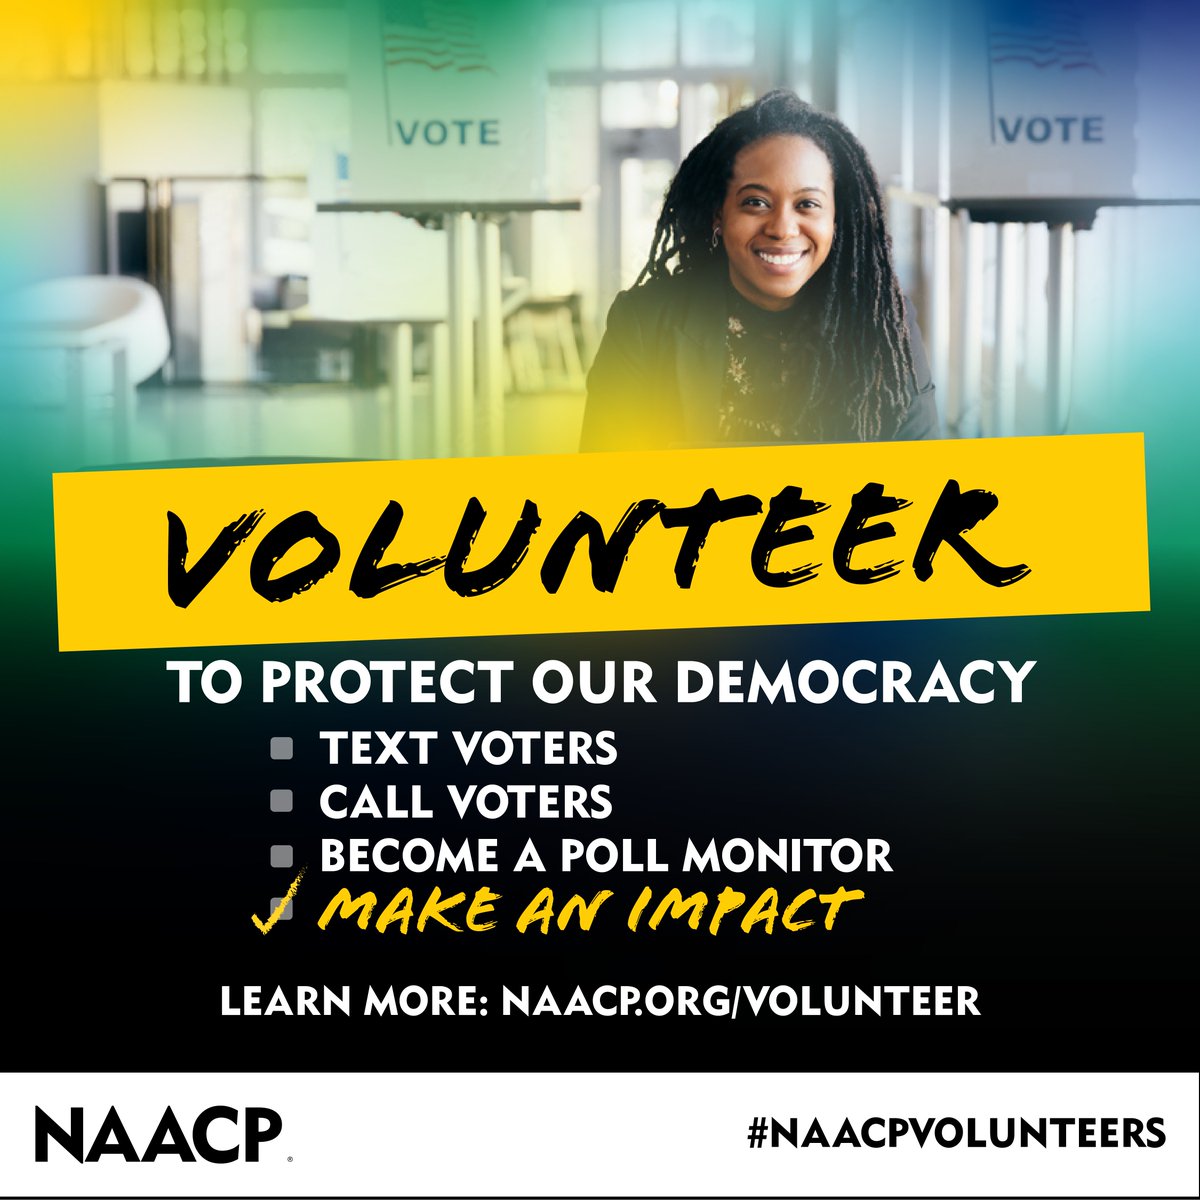 In this critical election year, we're pulling out every tool at our disposal to protect our democracy. Join us in making an impact. Learn more: bit.ly/4b8Qwu9 #VolunteerMonth #NAACPVolunteers